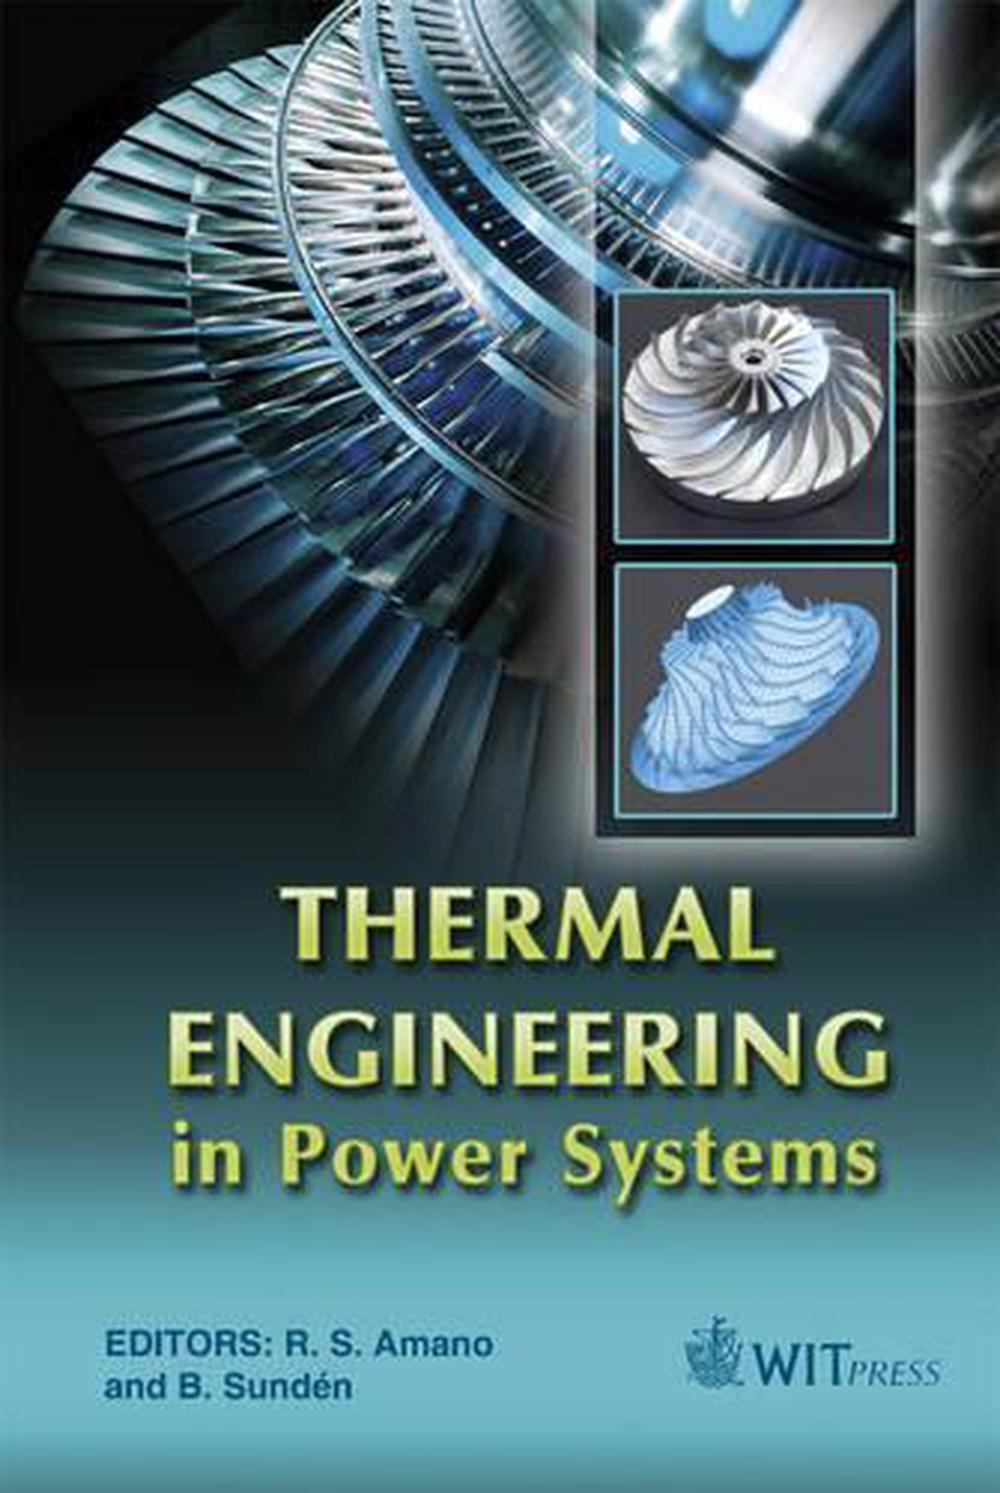 research paper thermal engineering